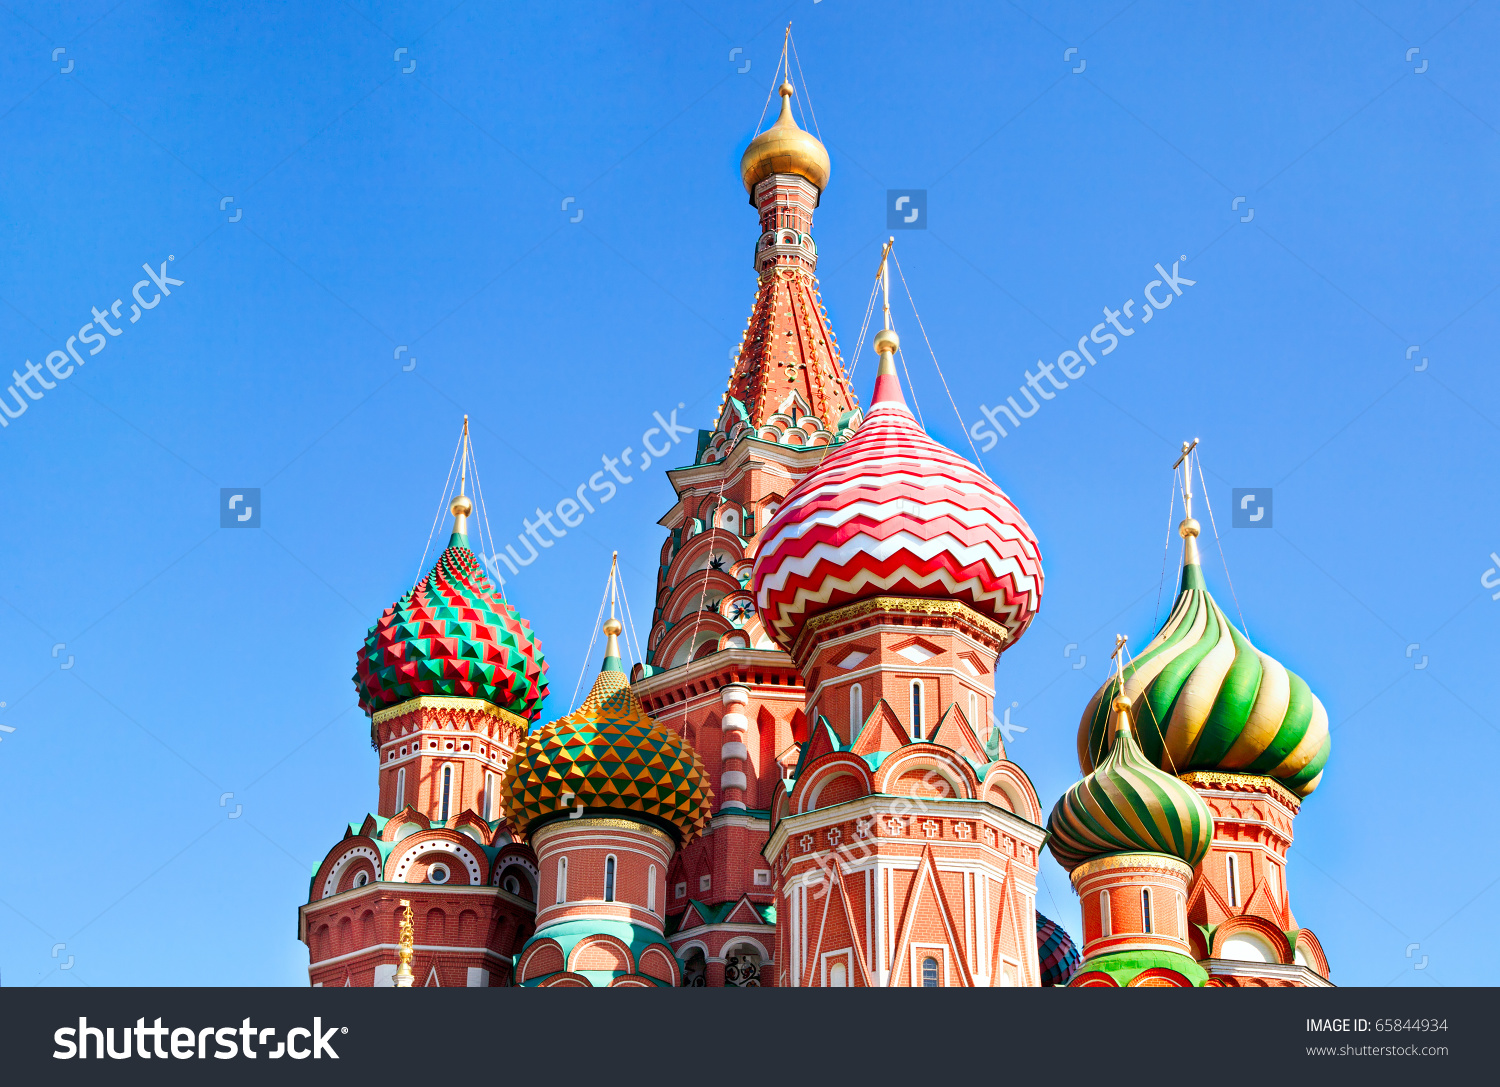 Cupola Of Saint Basil'S Cathedral On Red Square, Detailed View.